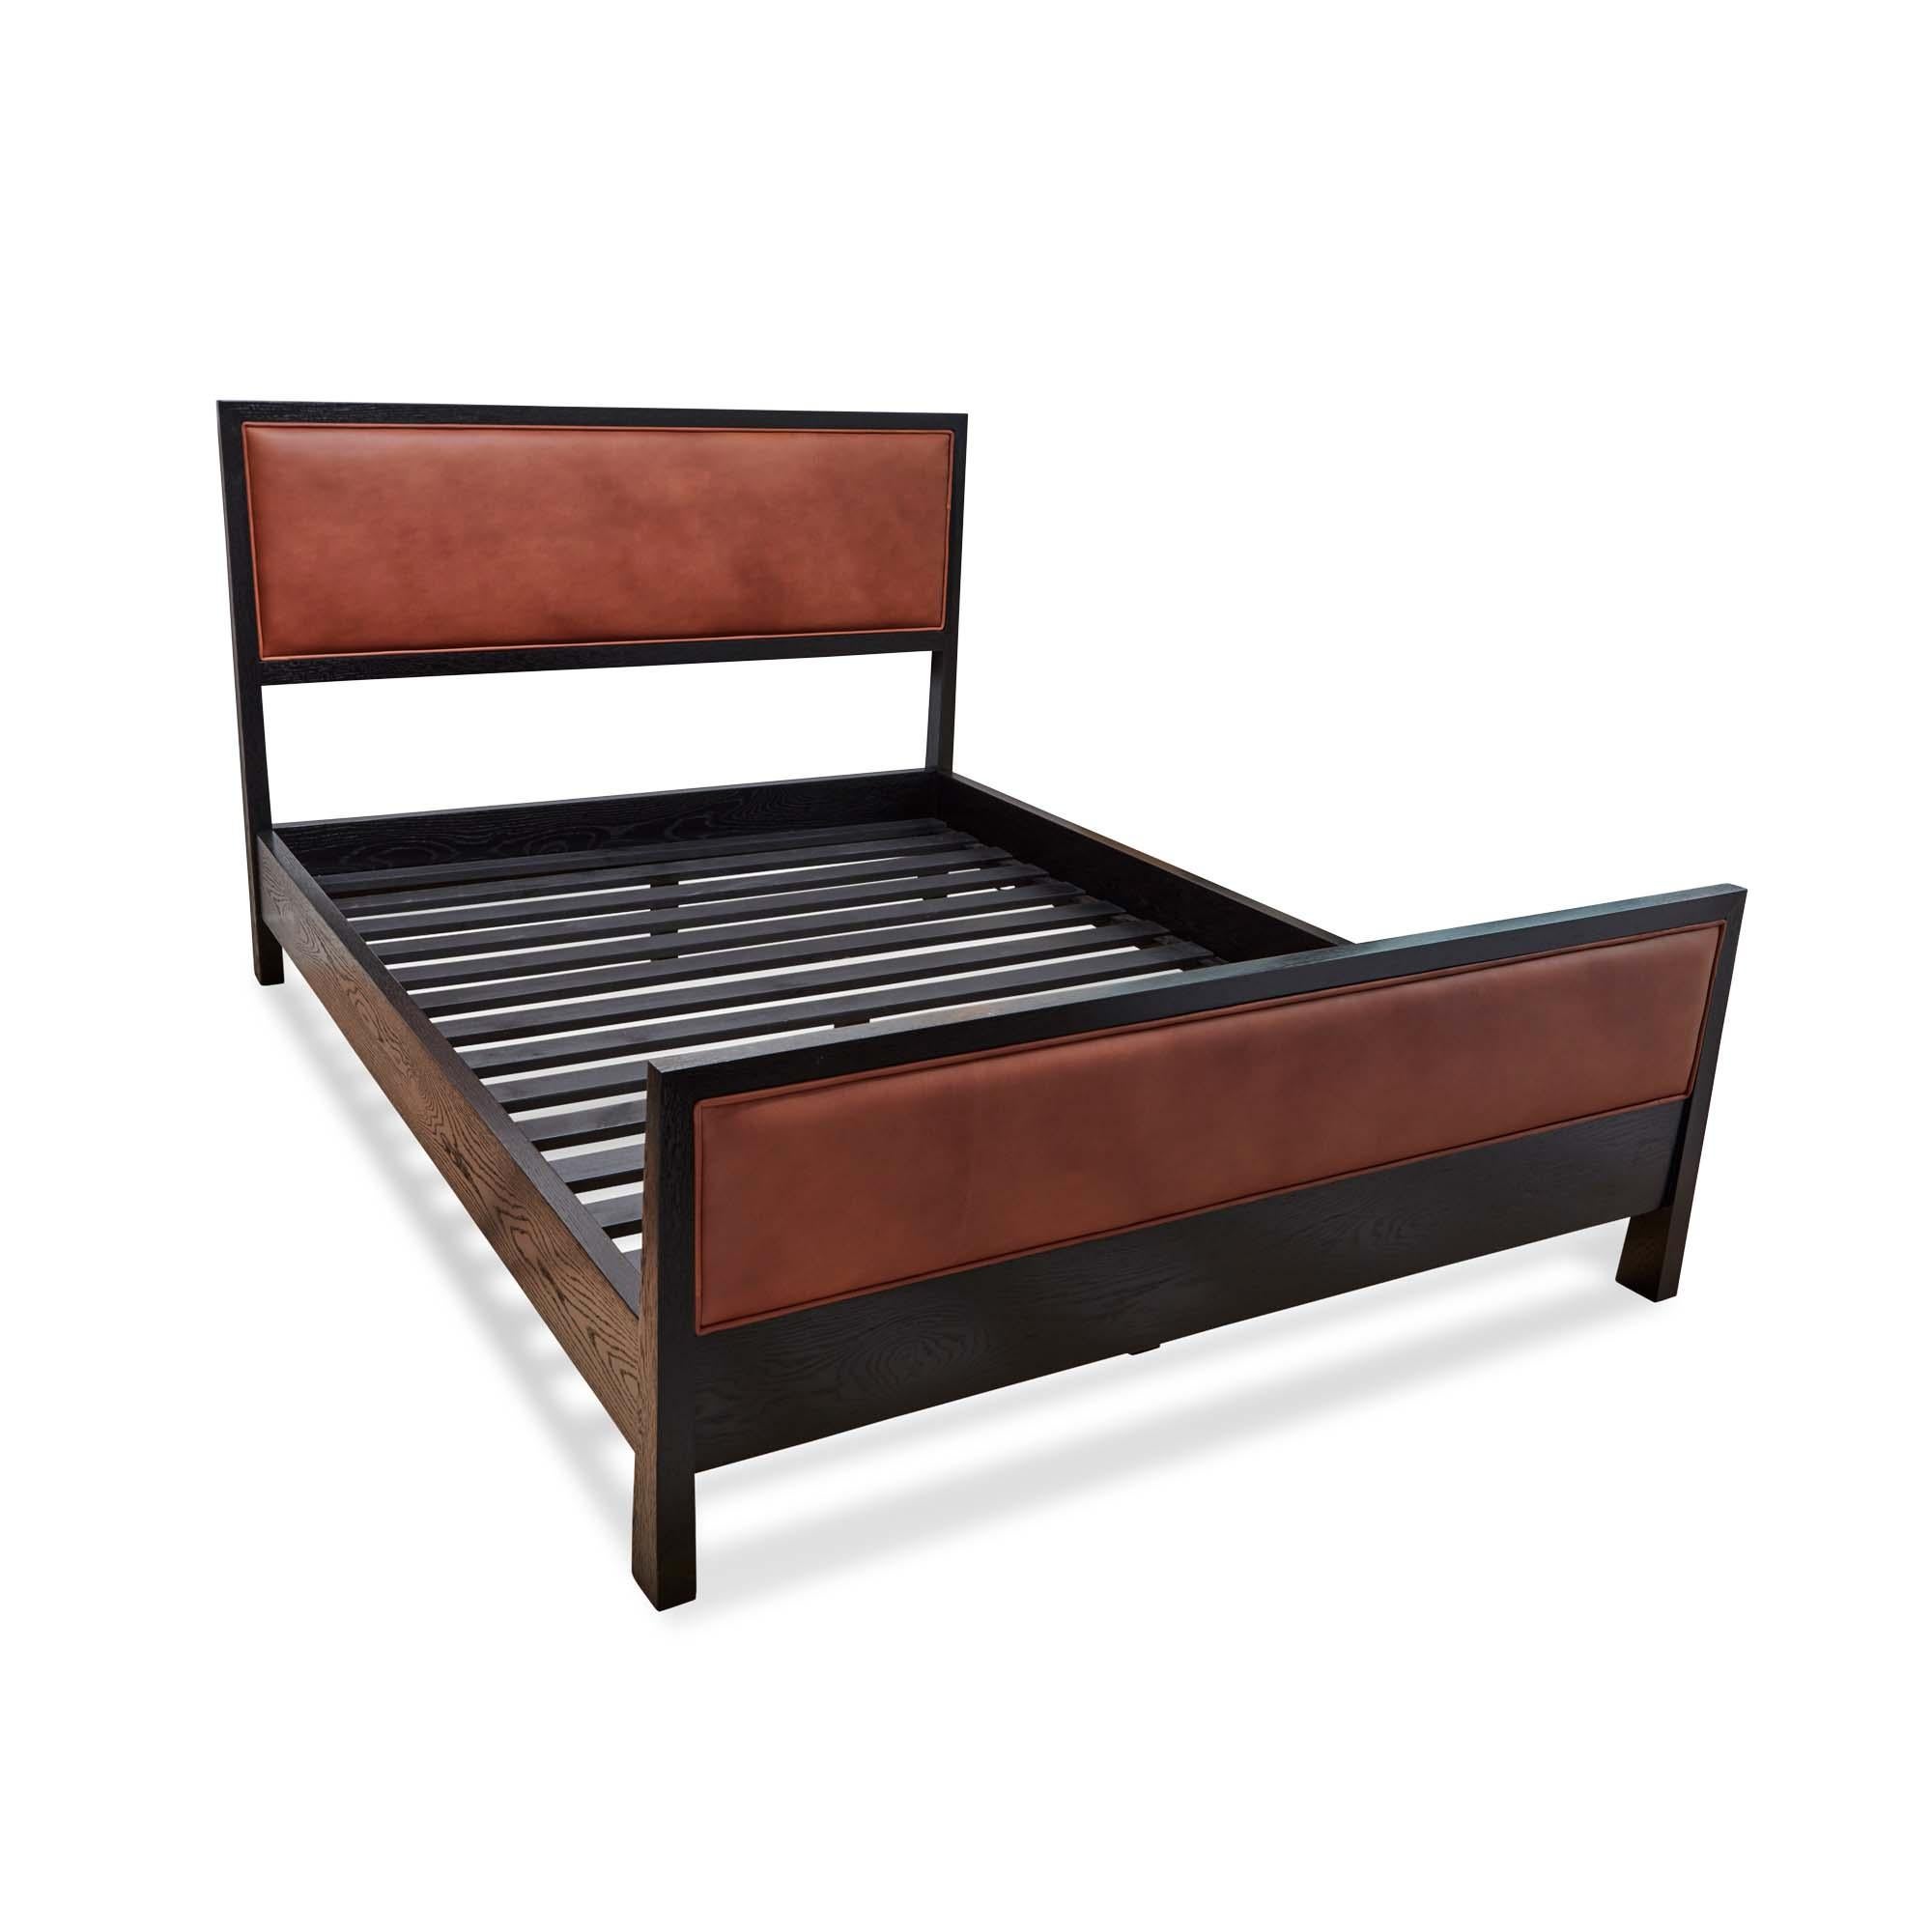 The Auden bed is a solid wood framed bed that can be made in either American walnut or white oak. The piece features an upholstered headboard and footboard. Slats are provided. Shown here in cognac leather and in ebonized oak. Queen size. 

The